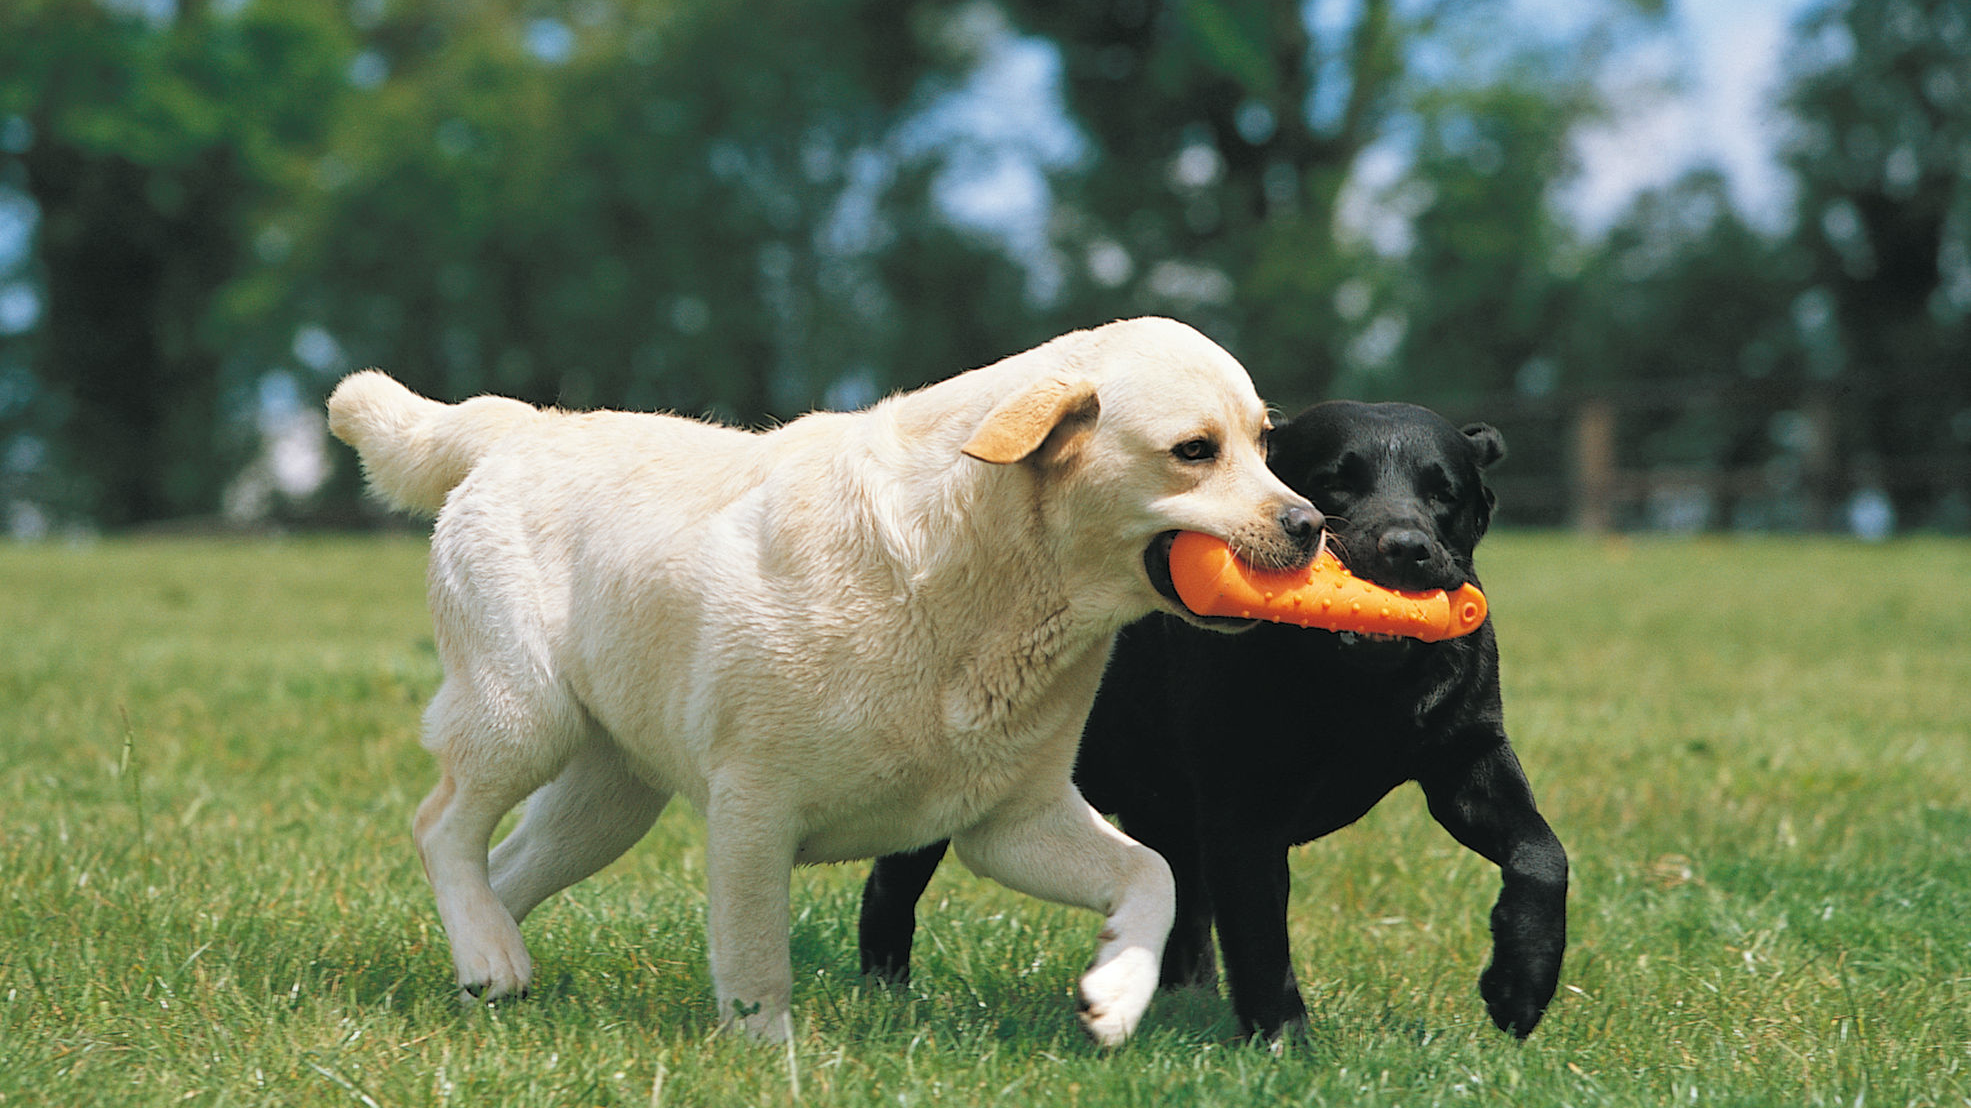 Black and golden Labrador biting onto one orange toy while running on grass